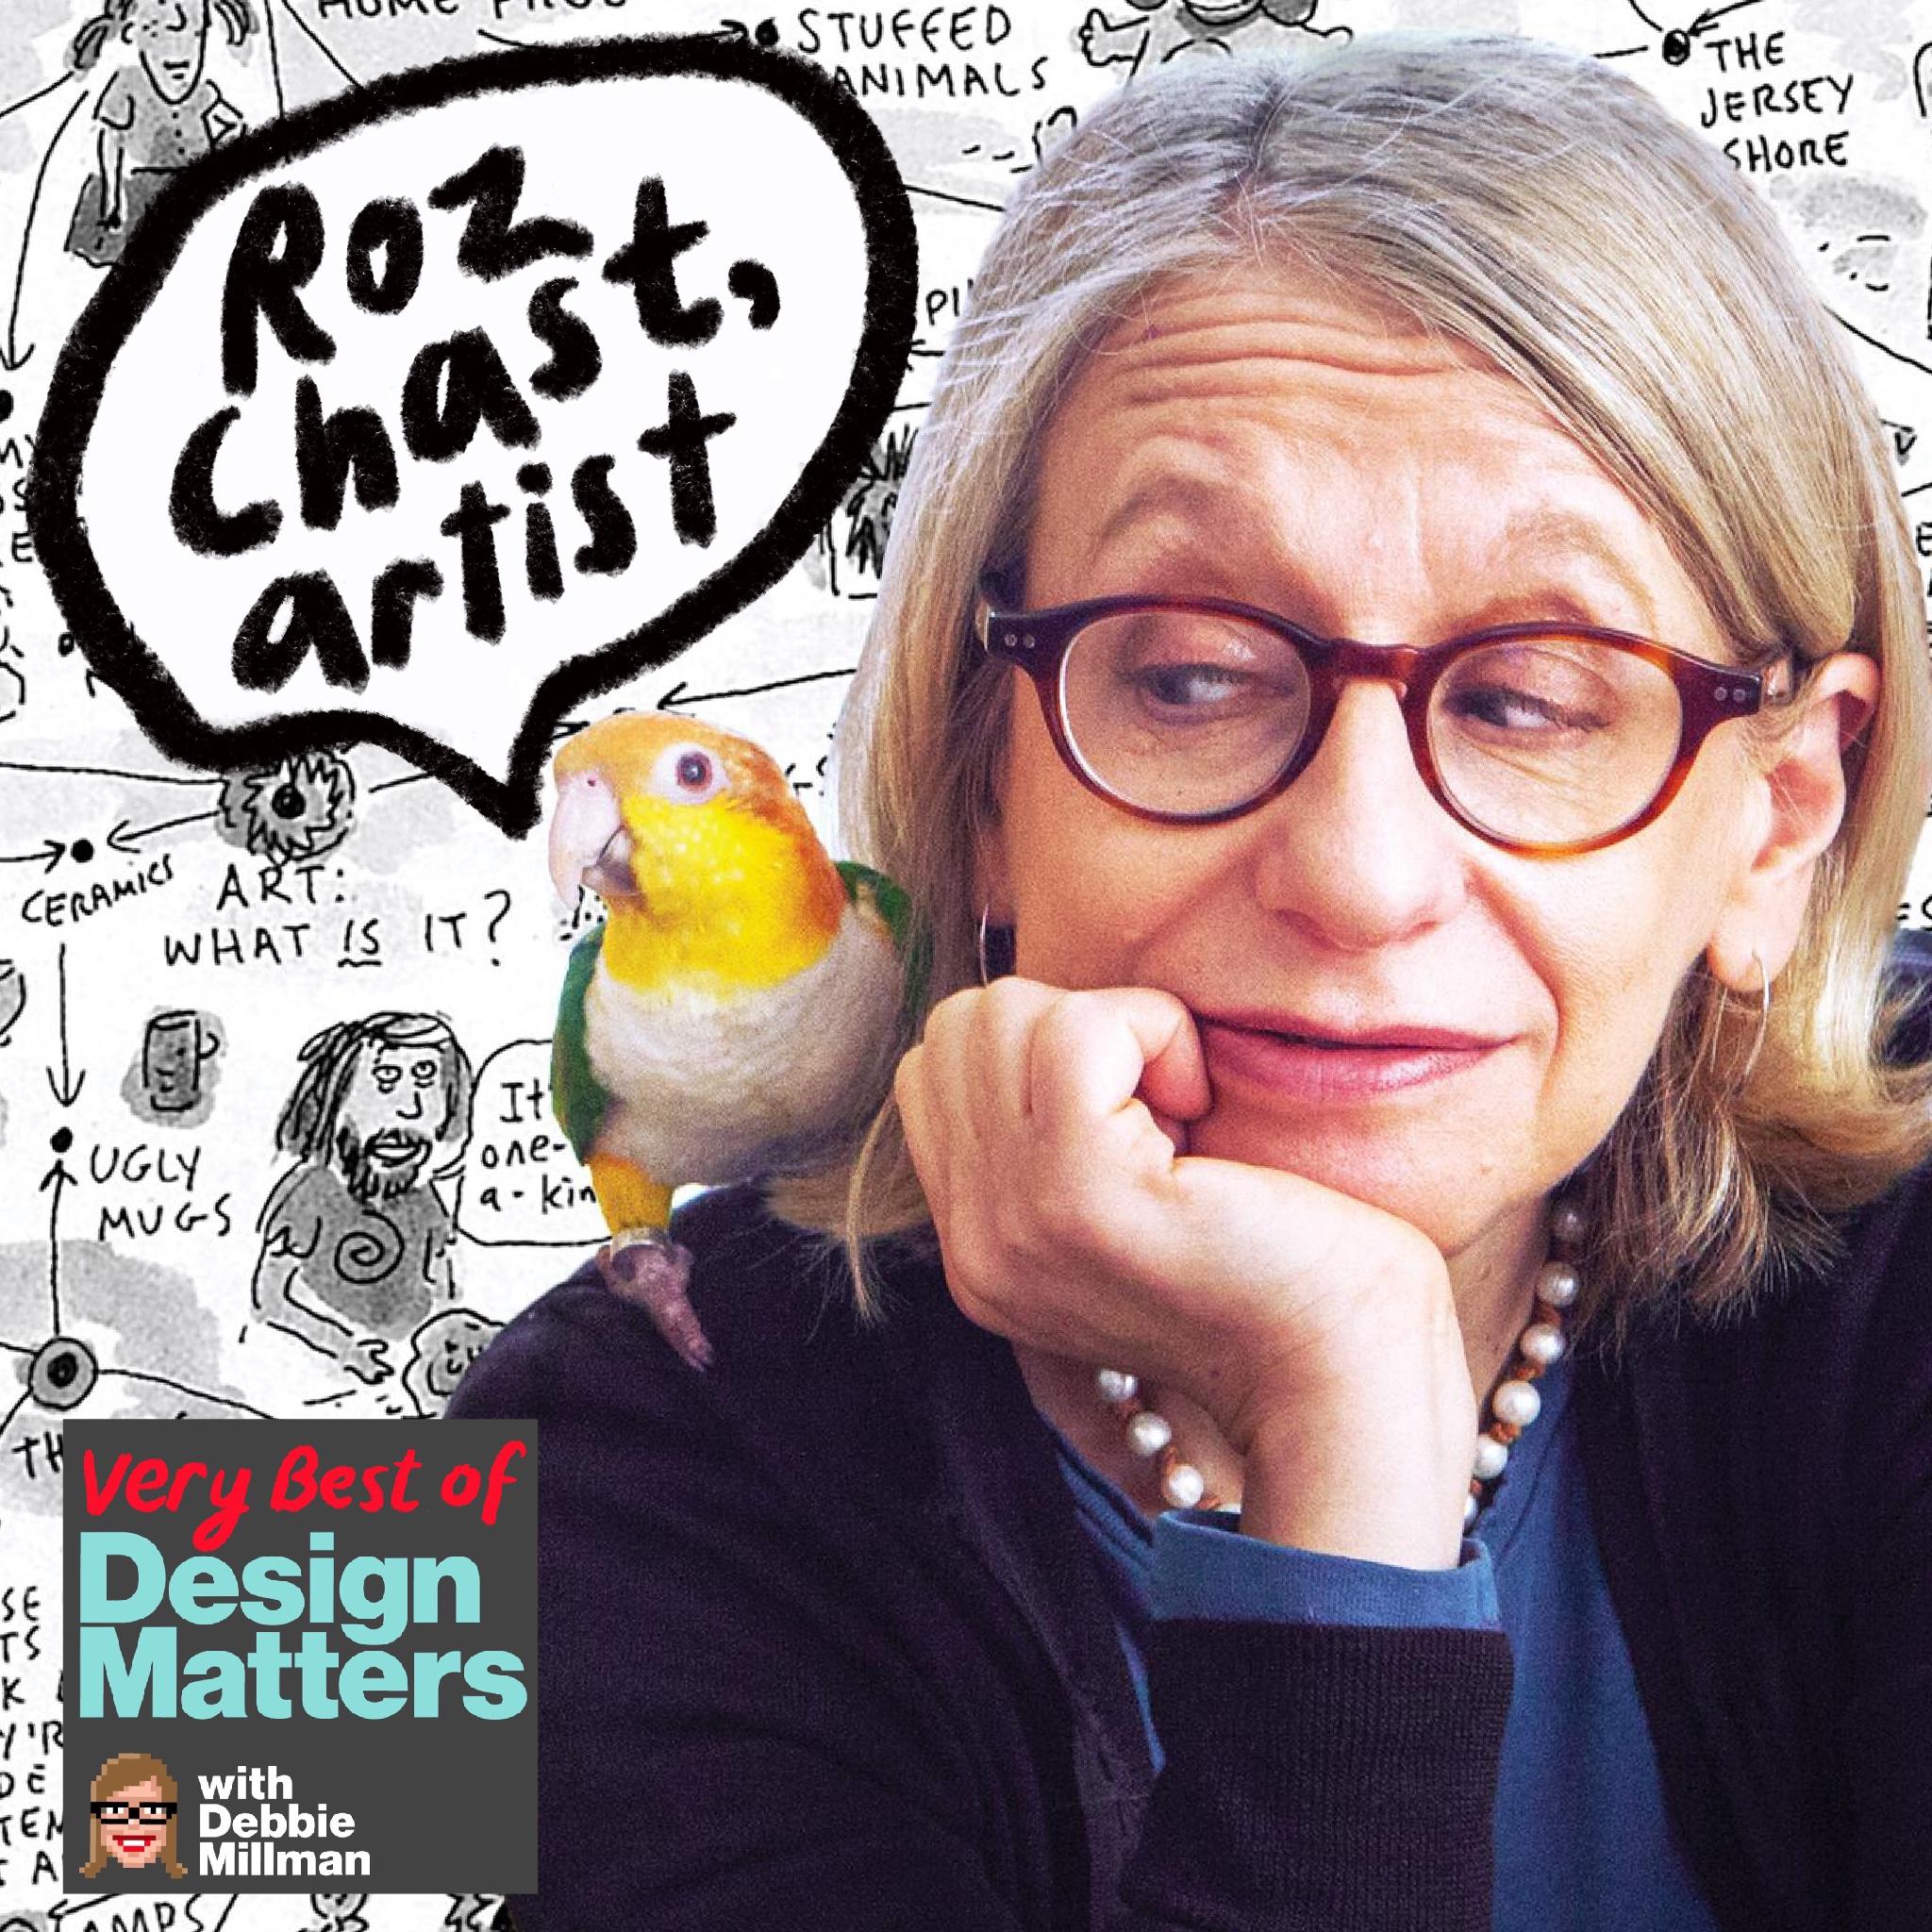 Thumbnail for "Best of Design Matters: Roz Chast".